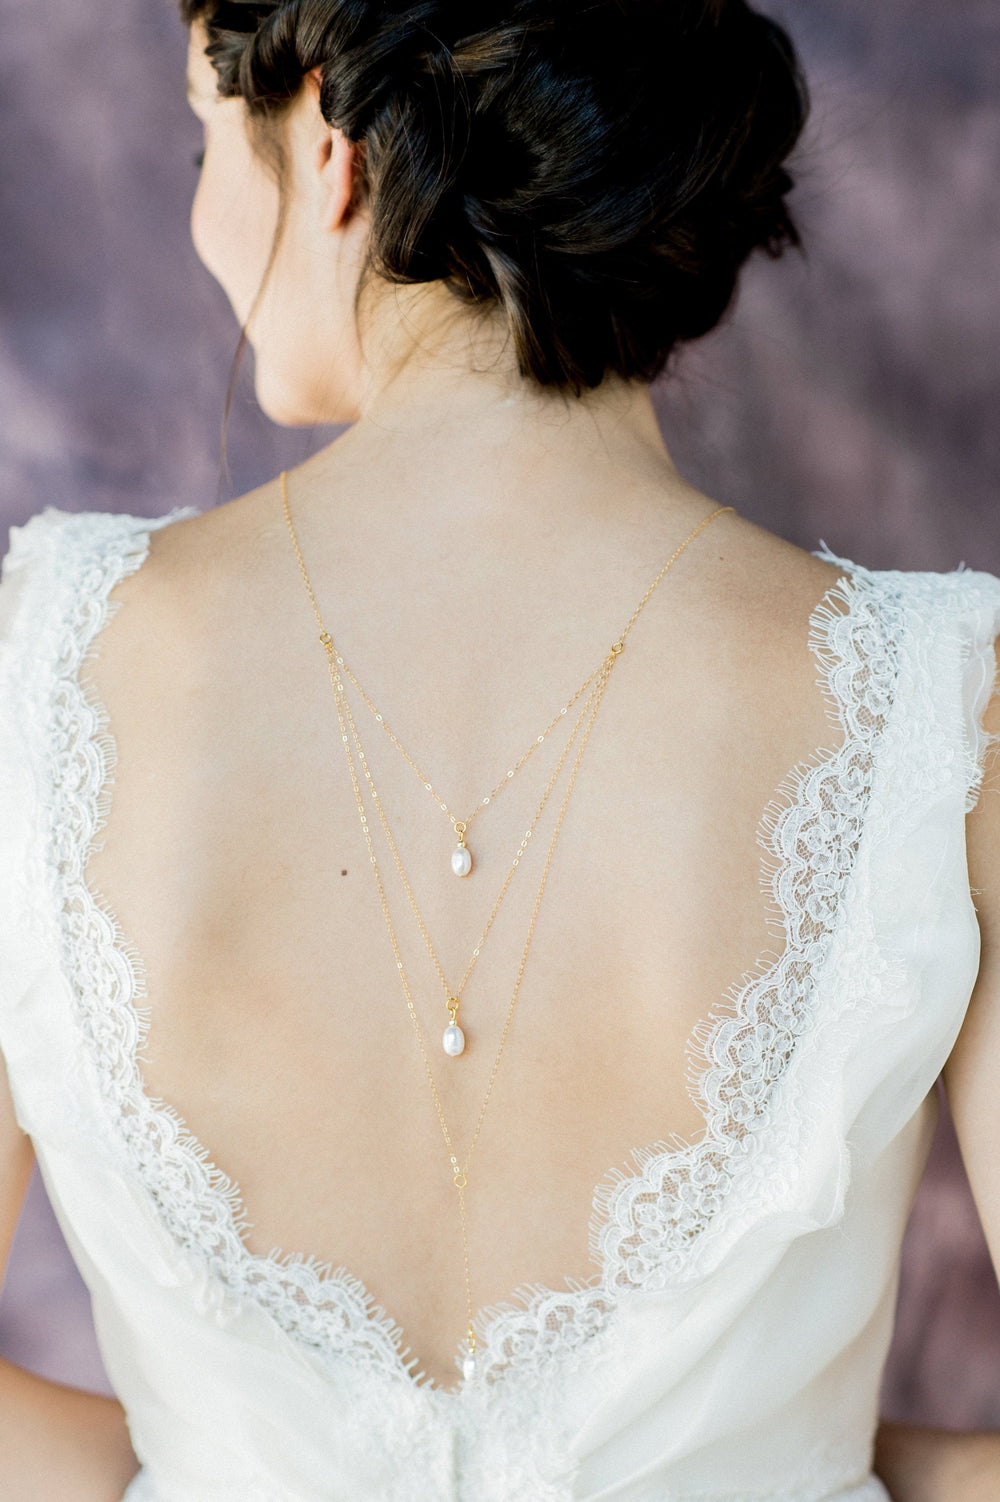 Silver Freshwater Pearl Layered Bridal Back Necklace, large pearl bridal headband for modern brides. made in toronto canada by Blair nadeau bridal adornments